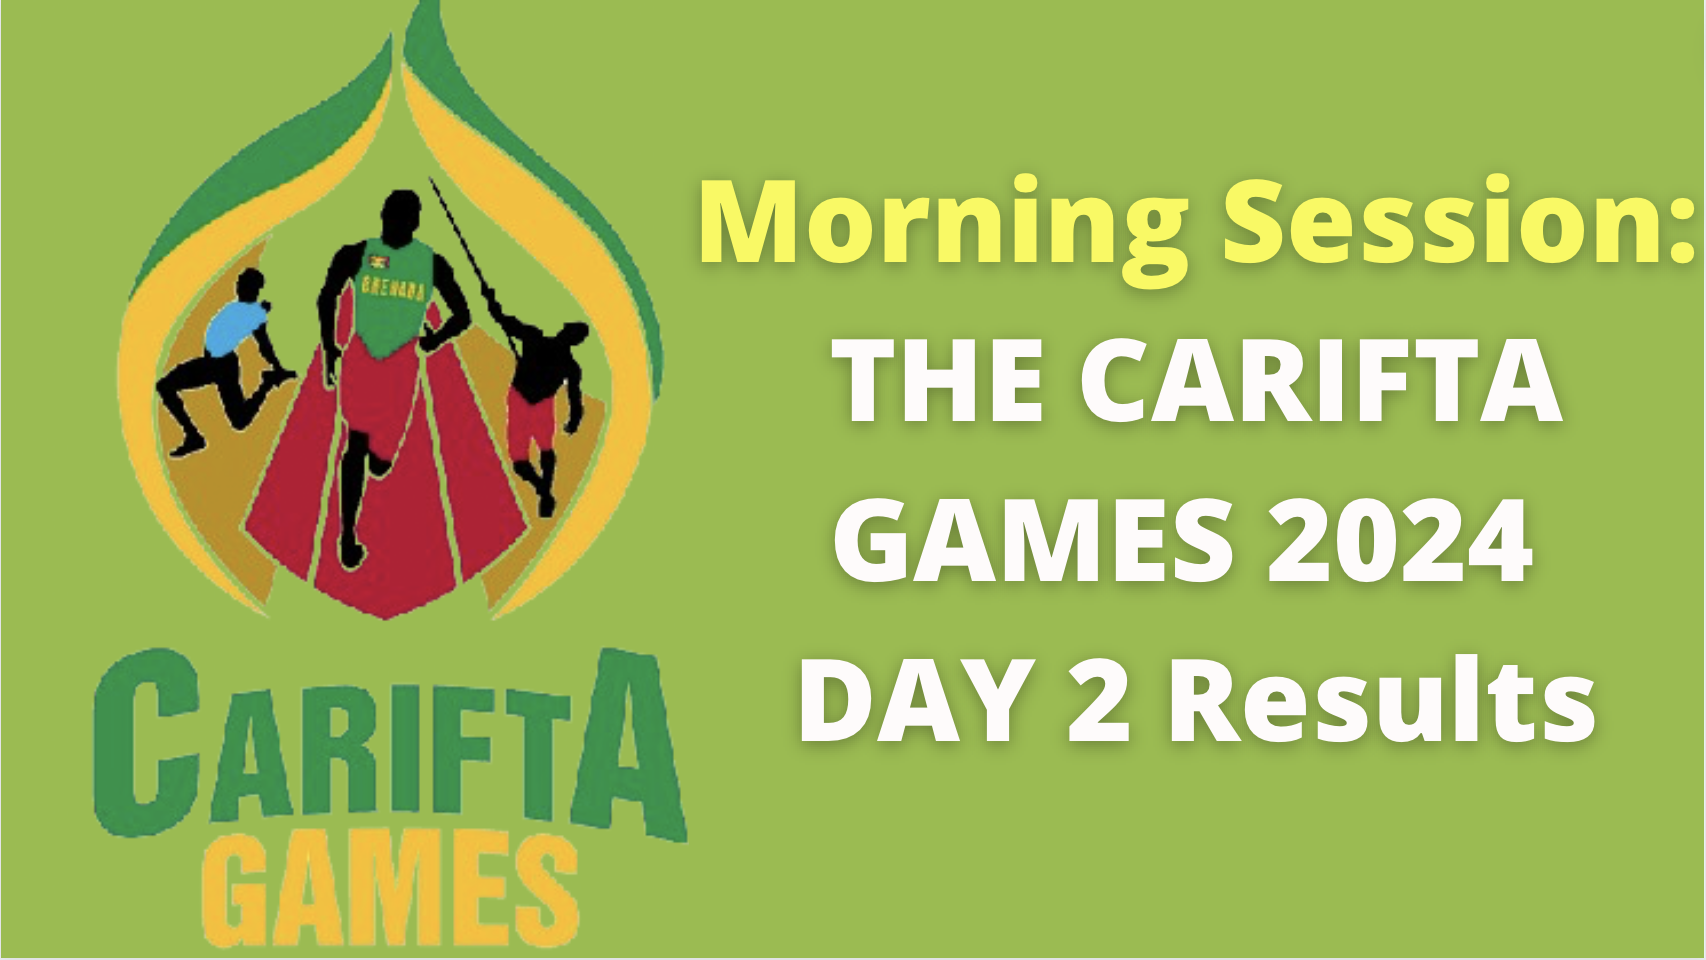 Day 2: Carifta Games 2024 results from finals – Morning Session